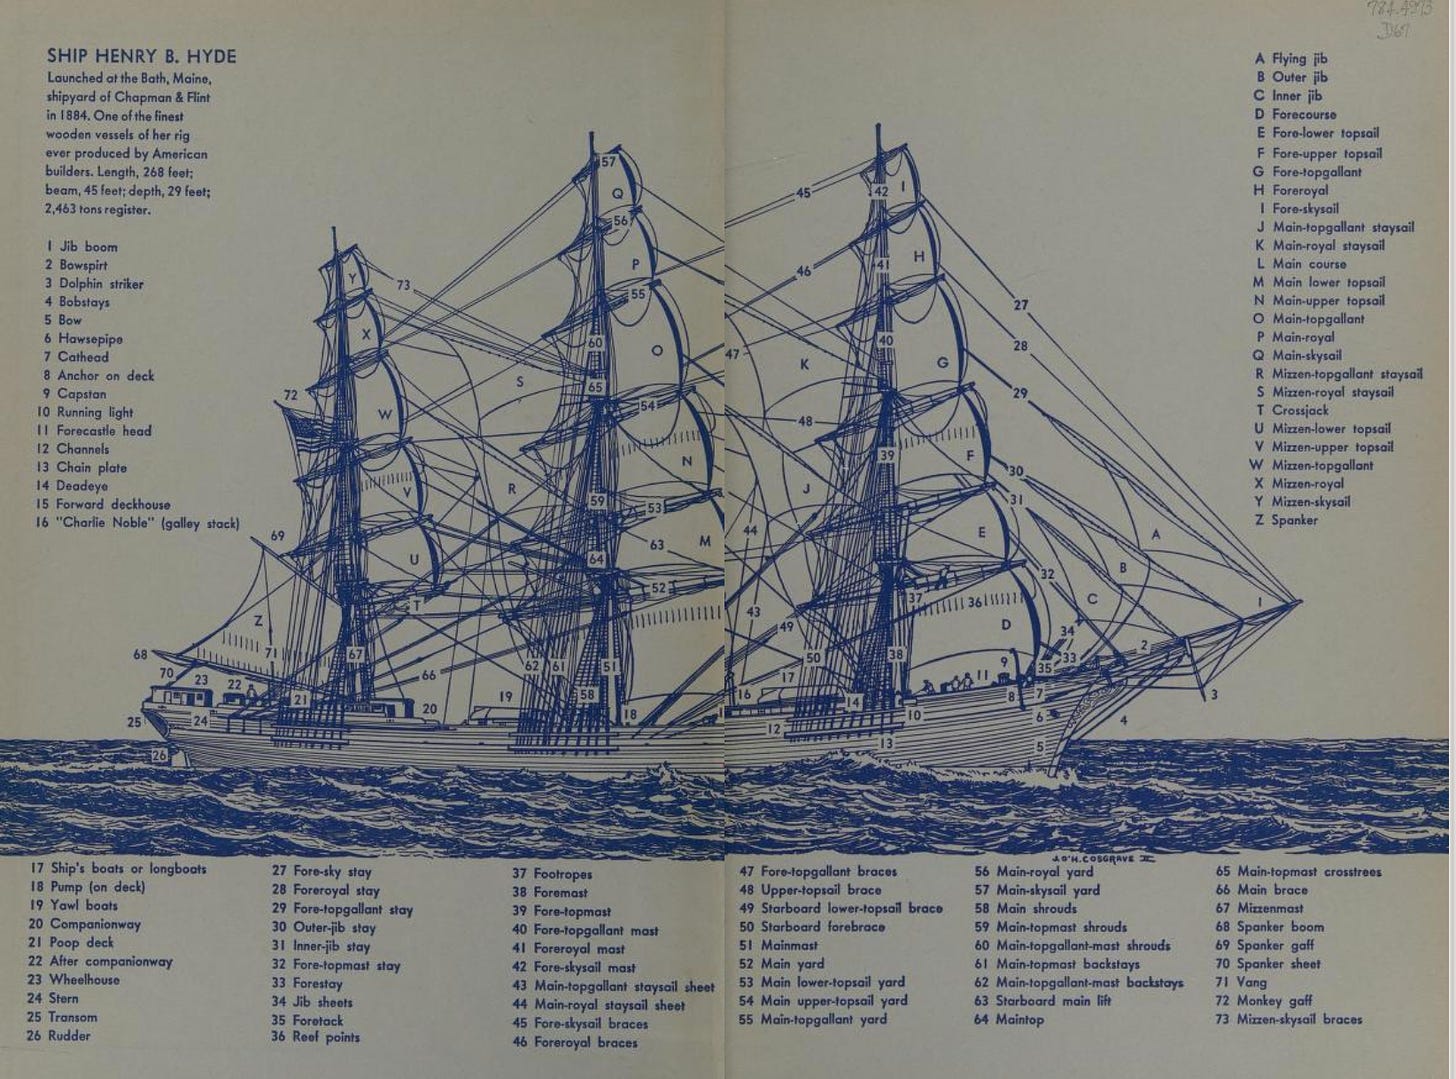 Illustration of the parts of a sailing ship